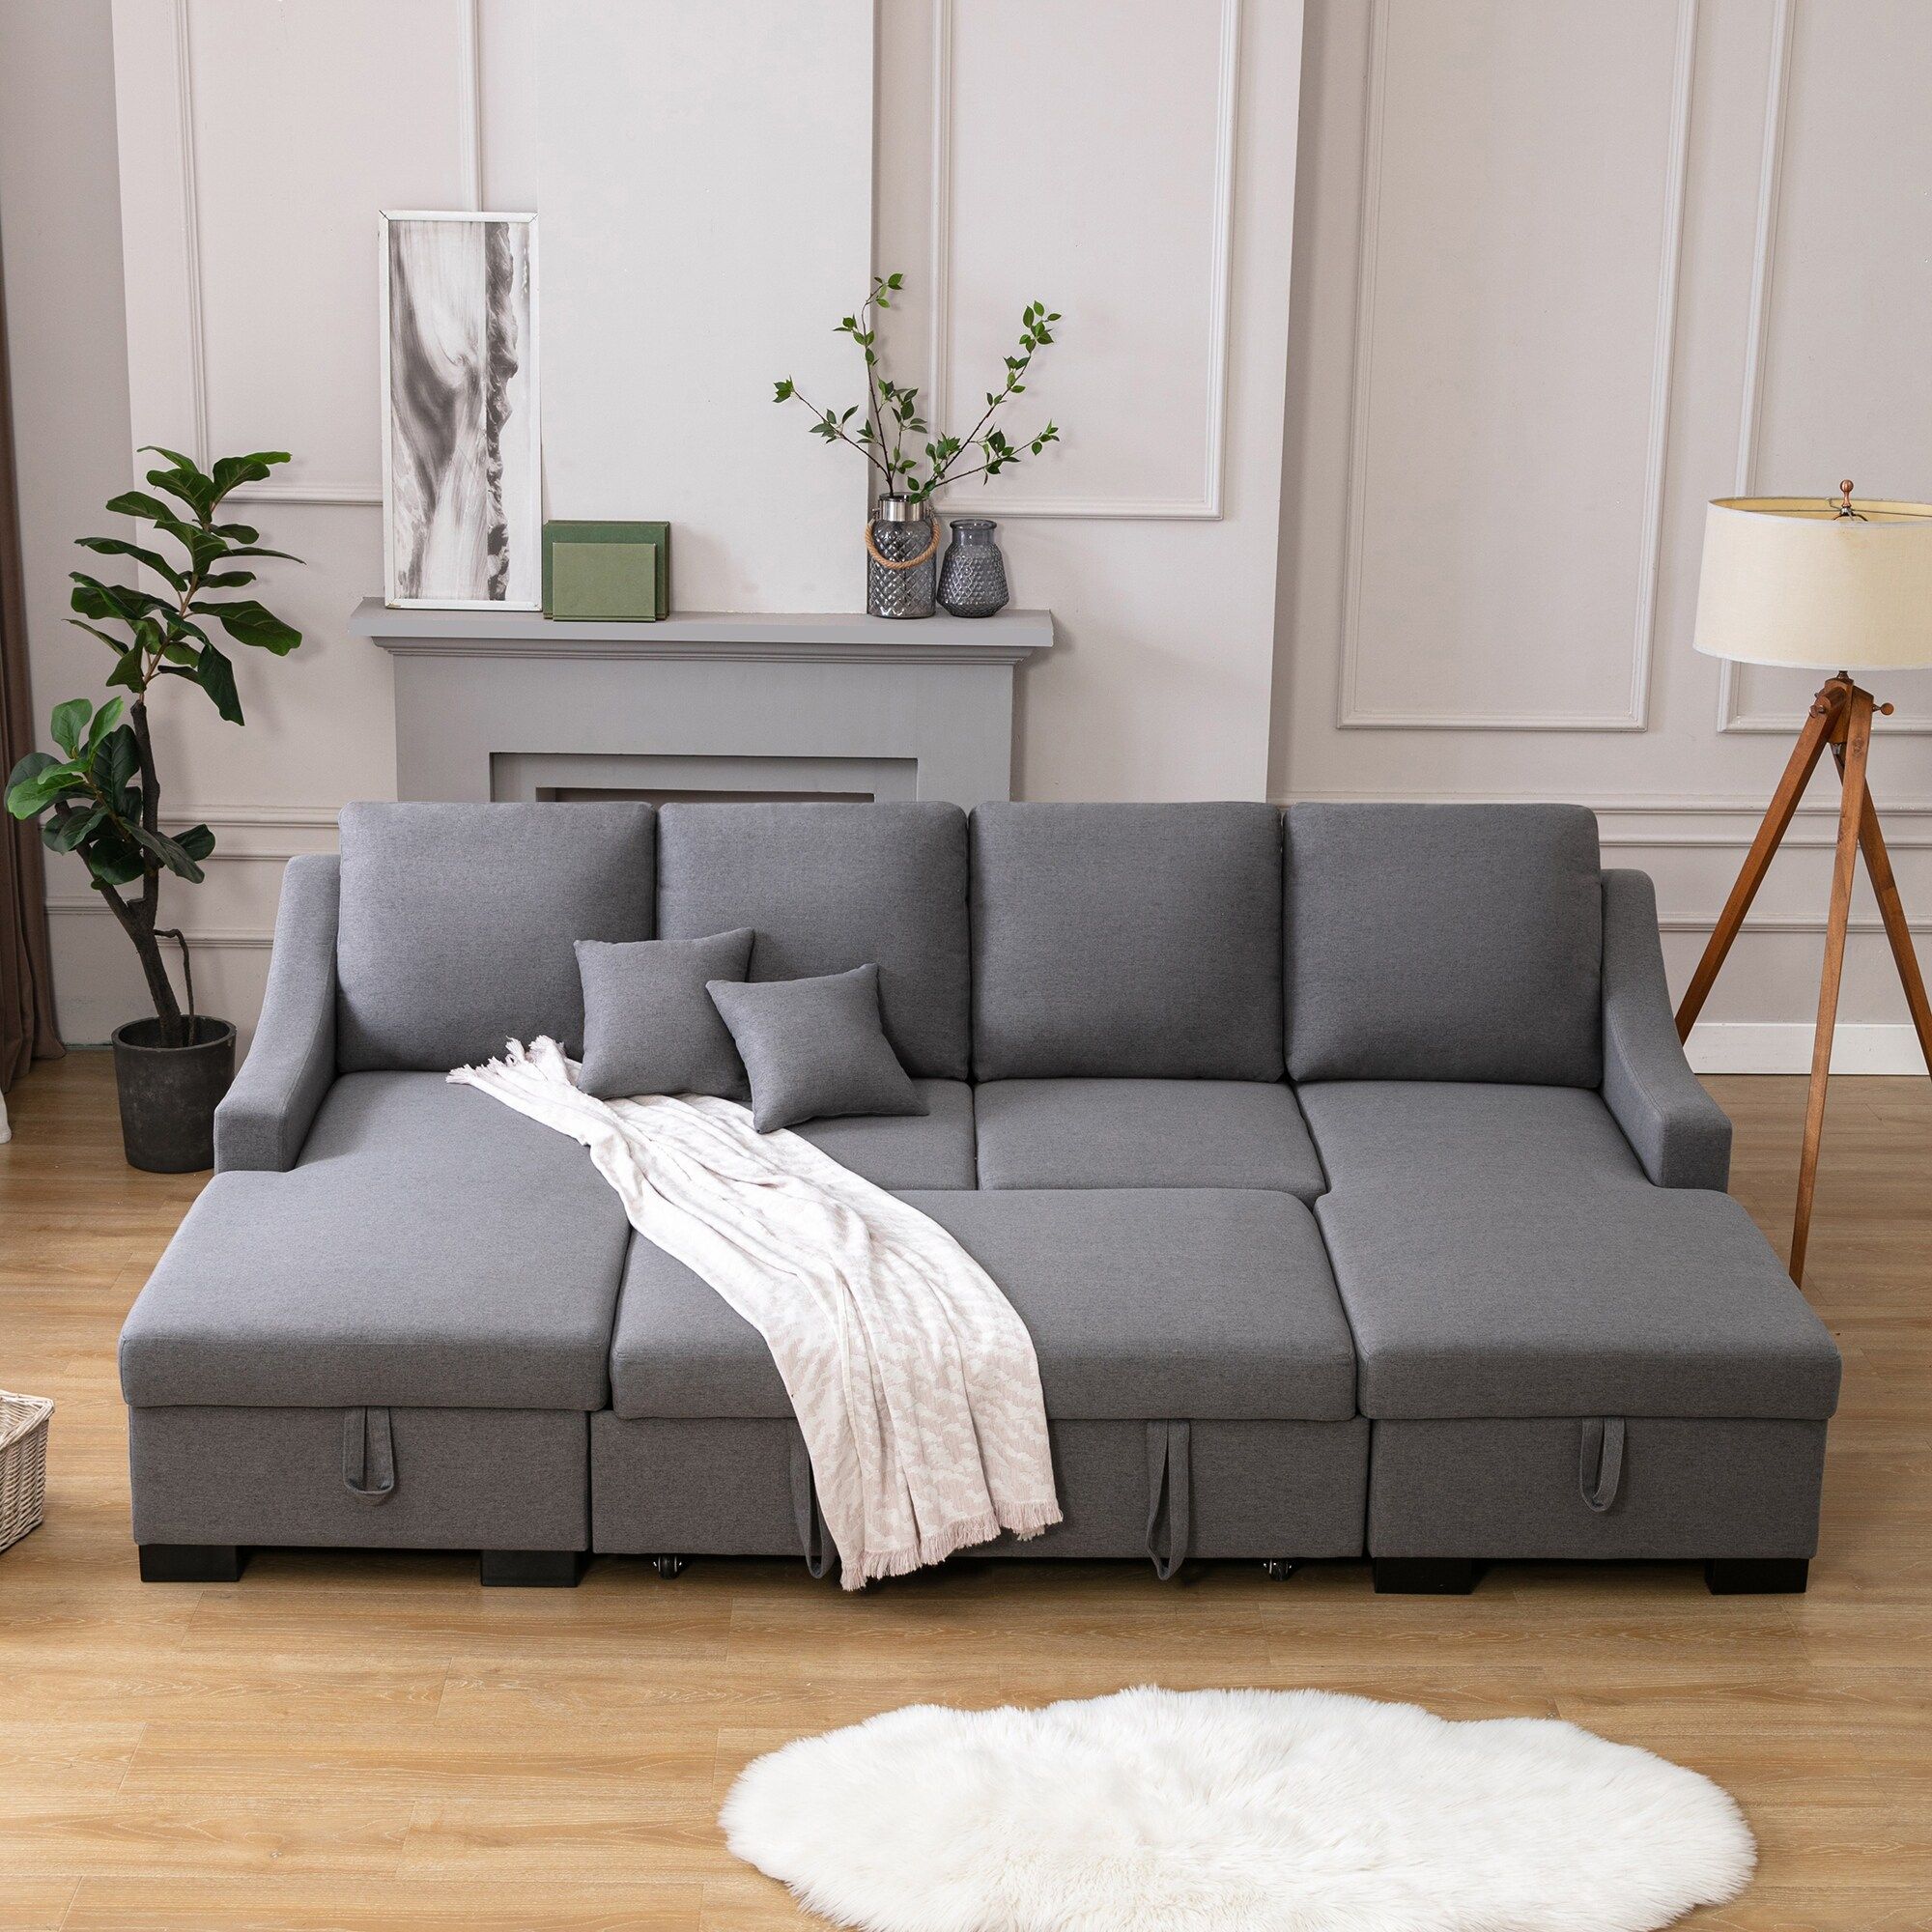 U Shape Sleeper Sectional Sofa With Pulled Out Bed 103 5 Upholstery Couch With Double Storage Spaces 2 Tossing Cushions 37311360 Regarding U Shaped Sectional Sofa With Pull Out Bed 